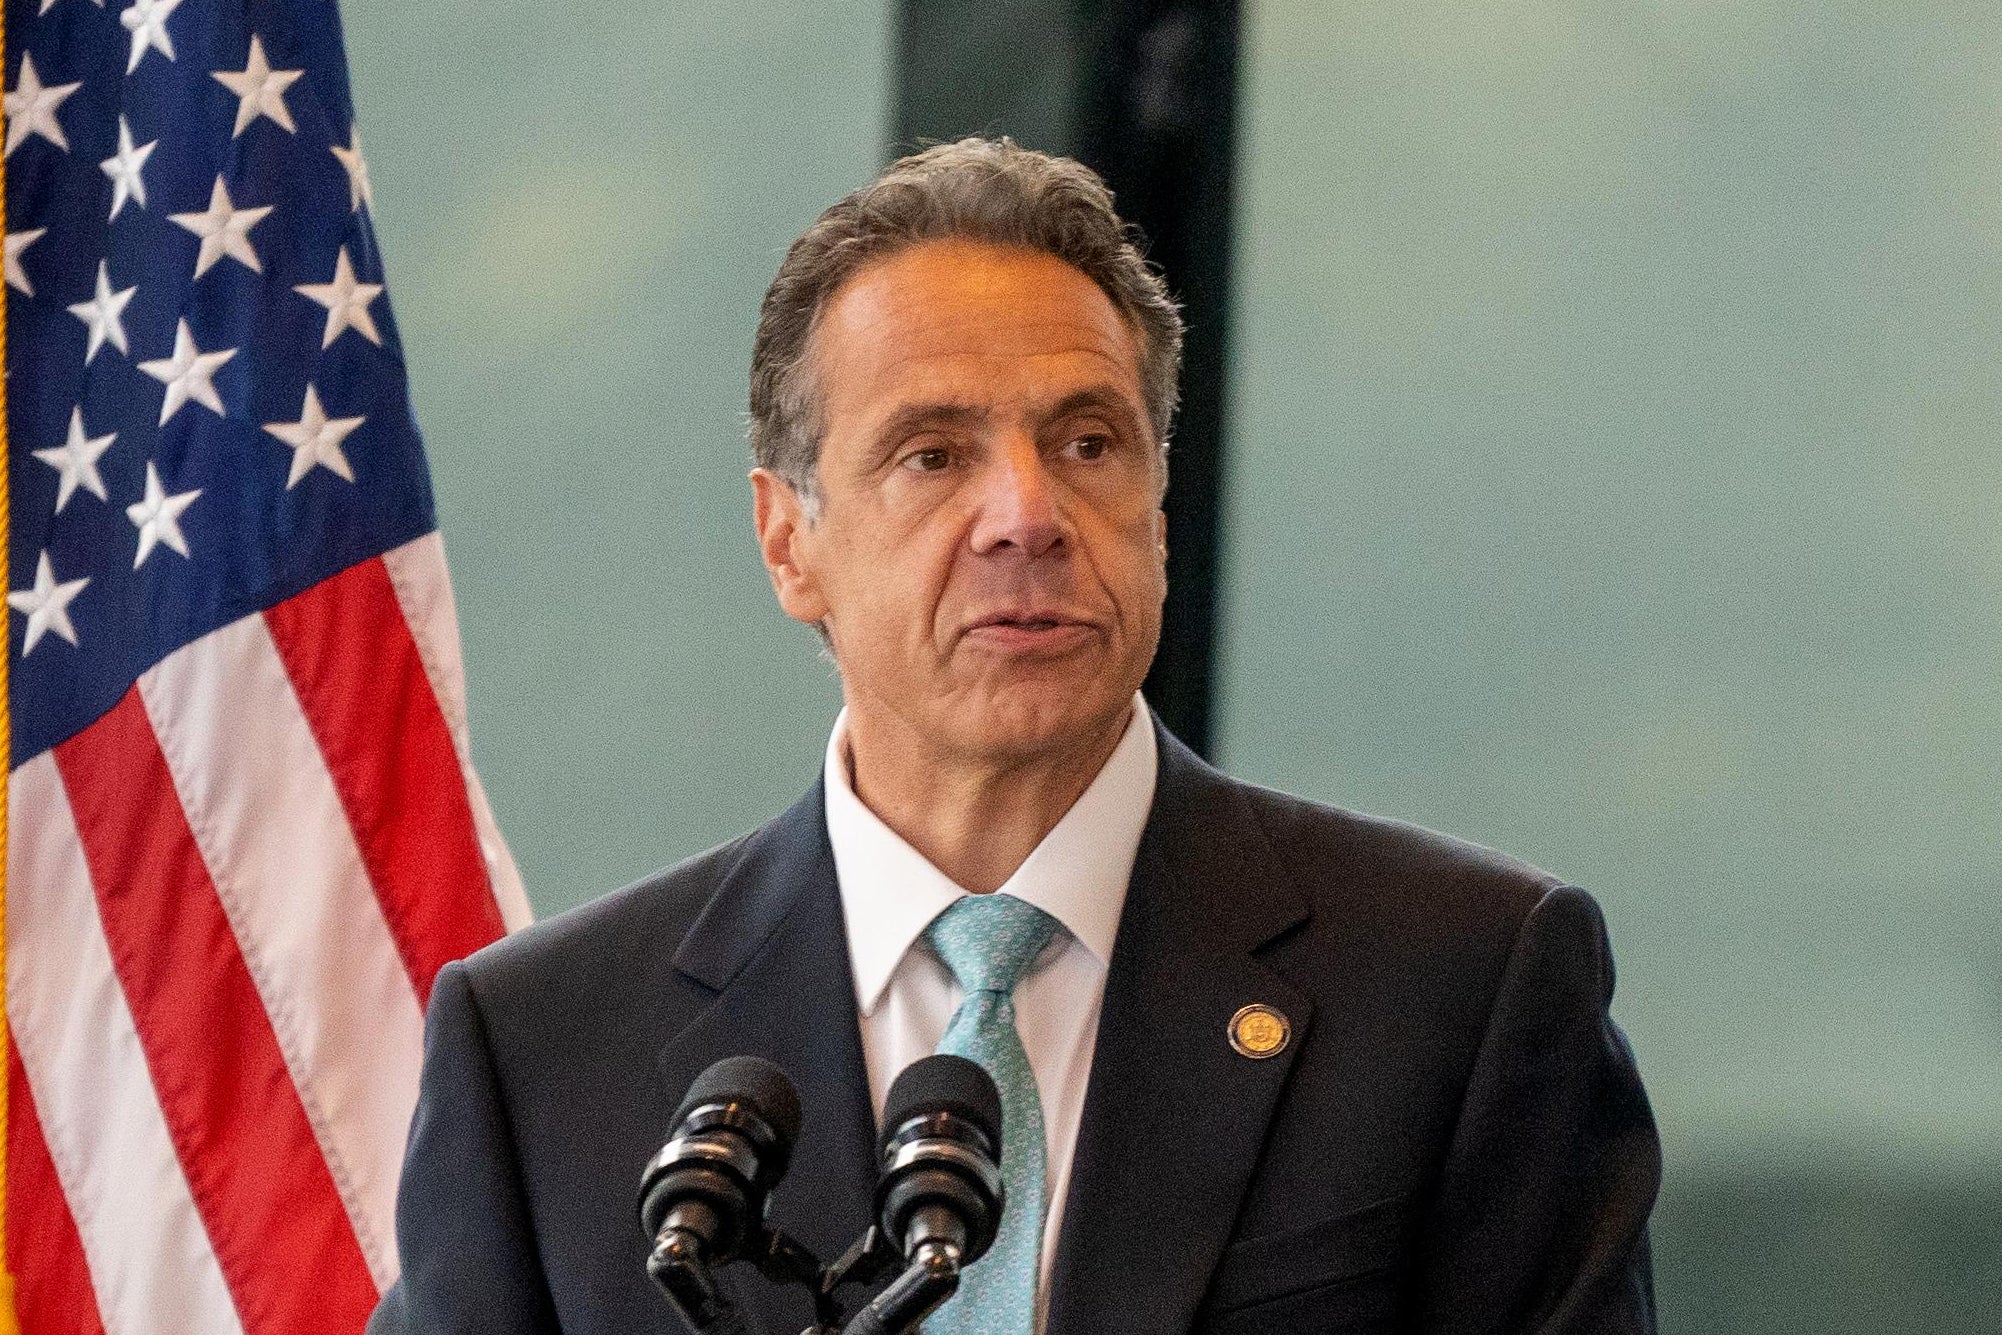 Andrew Cuomo speaking at a podium at One World Trade Center